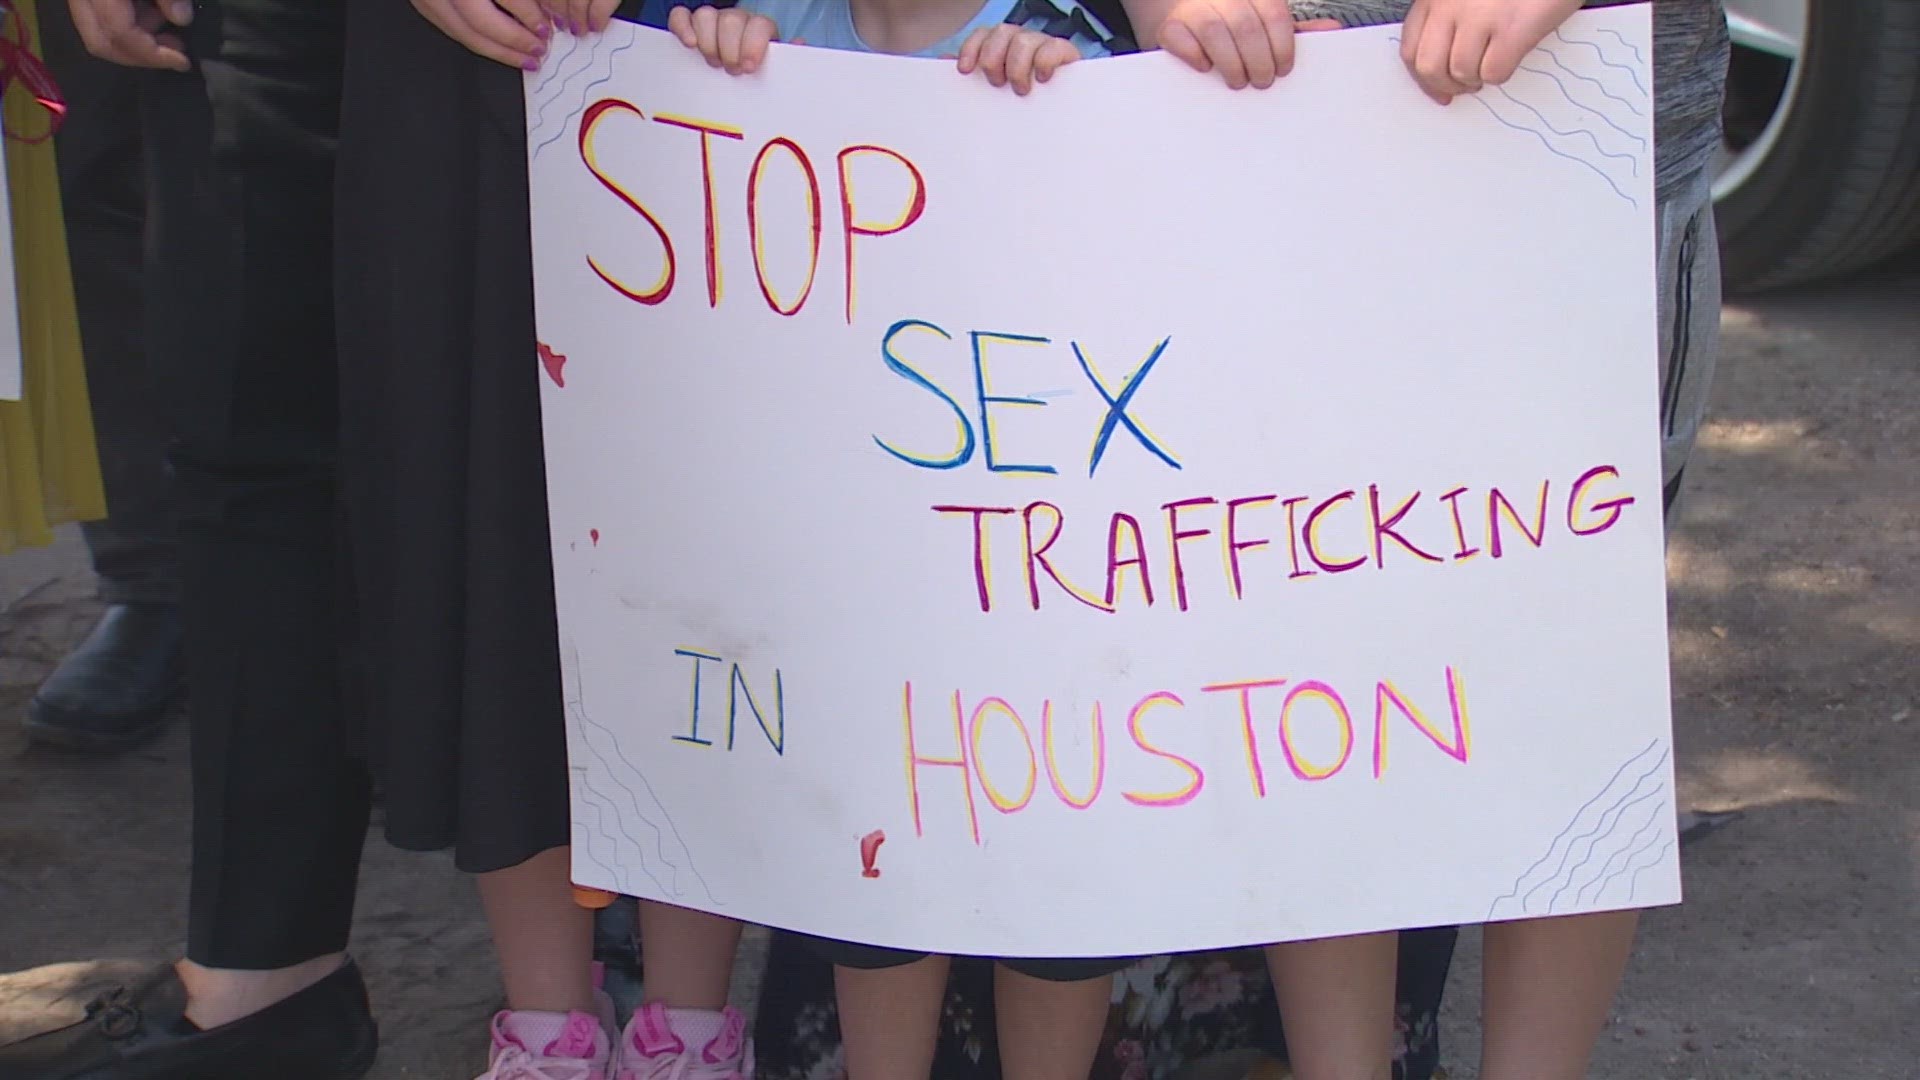 Roughly 79,000 minors are victims of sex trafficking each year across the state of Texas, according to the UT Austin School of Social Work.